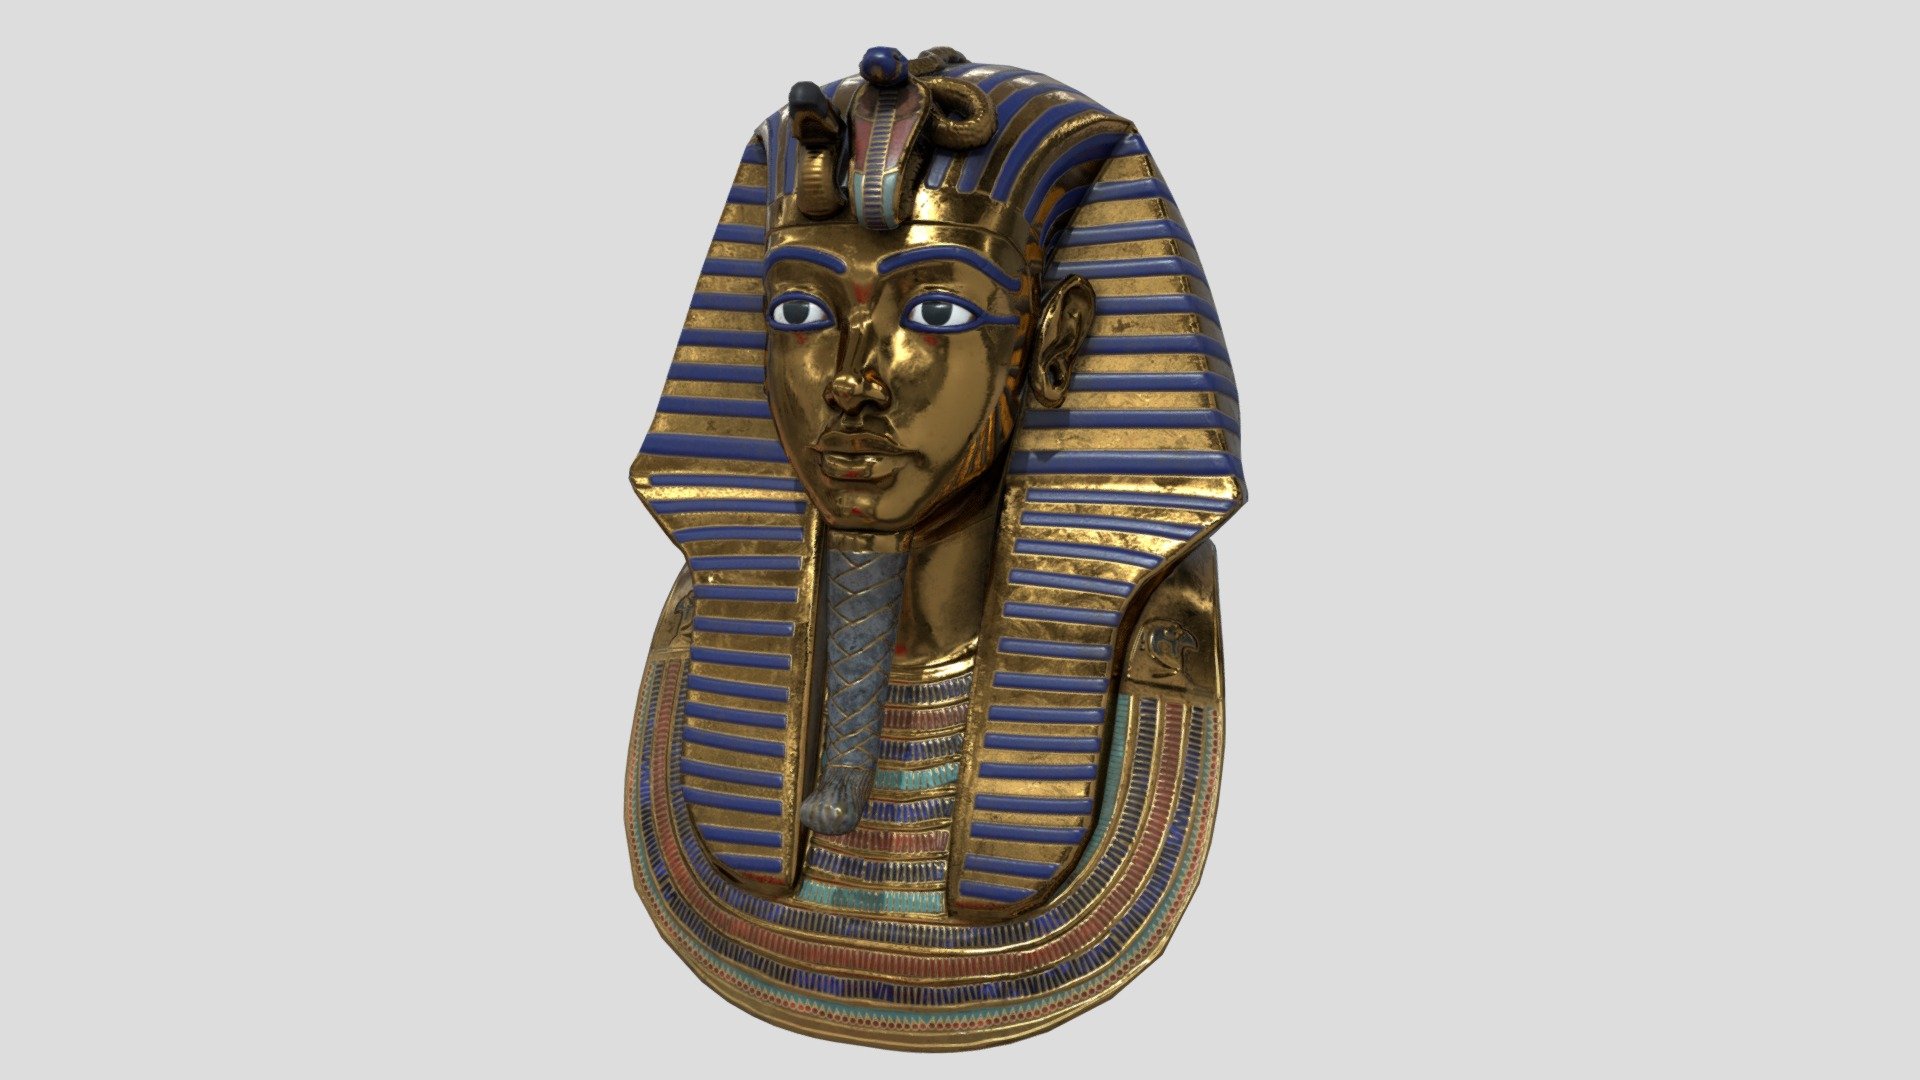 Tutankhamun Mask
The model has an optimized low poly mesh with the greatest possible number of simplifications that do not affect photo-realism but can help to simplify it, thus lightening your scene and allowing for using this model in real-time 3d applications.

Real-world accurate model.  In this product, all objects are ERROR-FREE and All LEGAL Geometry. Subdivisions are not required for this product.

Perfect for Architectural, Product visualization, Game Engine, and VR (Virtual Reality) No Plugin Needed.

Format Type




3ds Max 2017 (standard shader)

FBX

OBJ

3DS

Texture

1 material used. 1 different sets of textures:




Diffuse

Normal

Specular

Gloss

Specular n Gloss [.tga additional texture]

You might need to re-assign textures map to model in your relevant software - Tutankhamun Mask - Buy Royalty Free 3D model by luxe3dworld 3d model